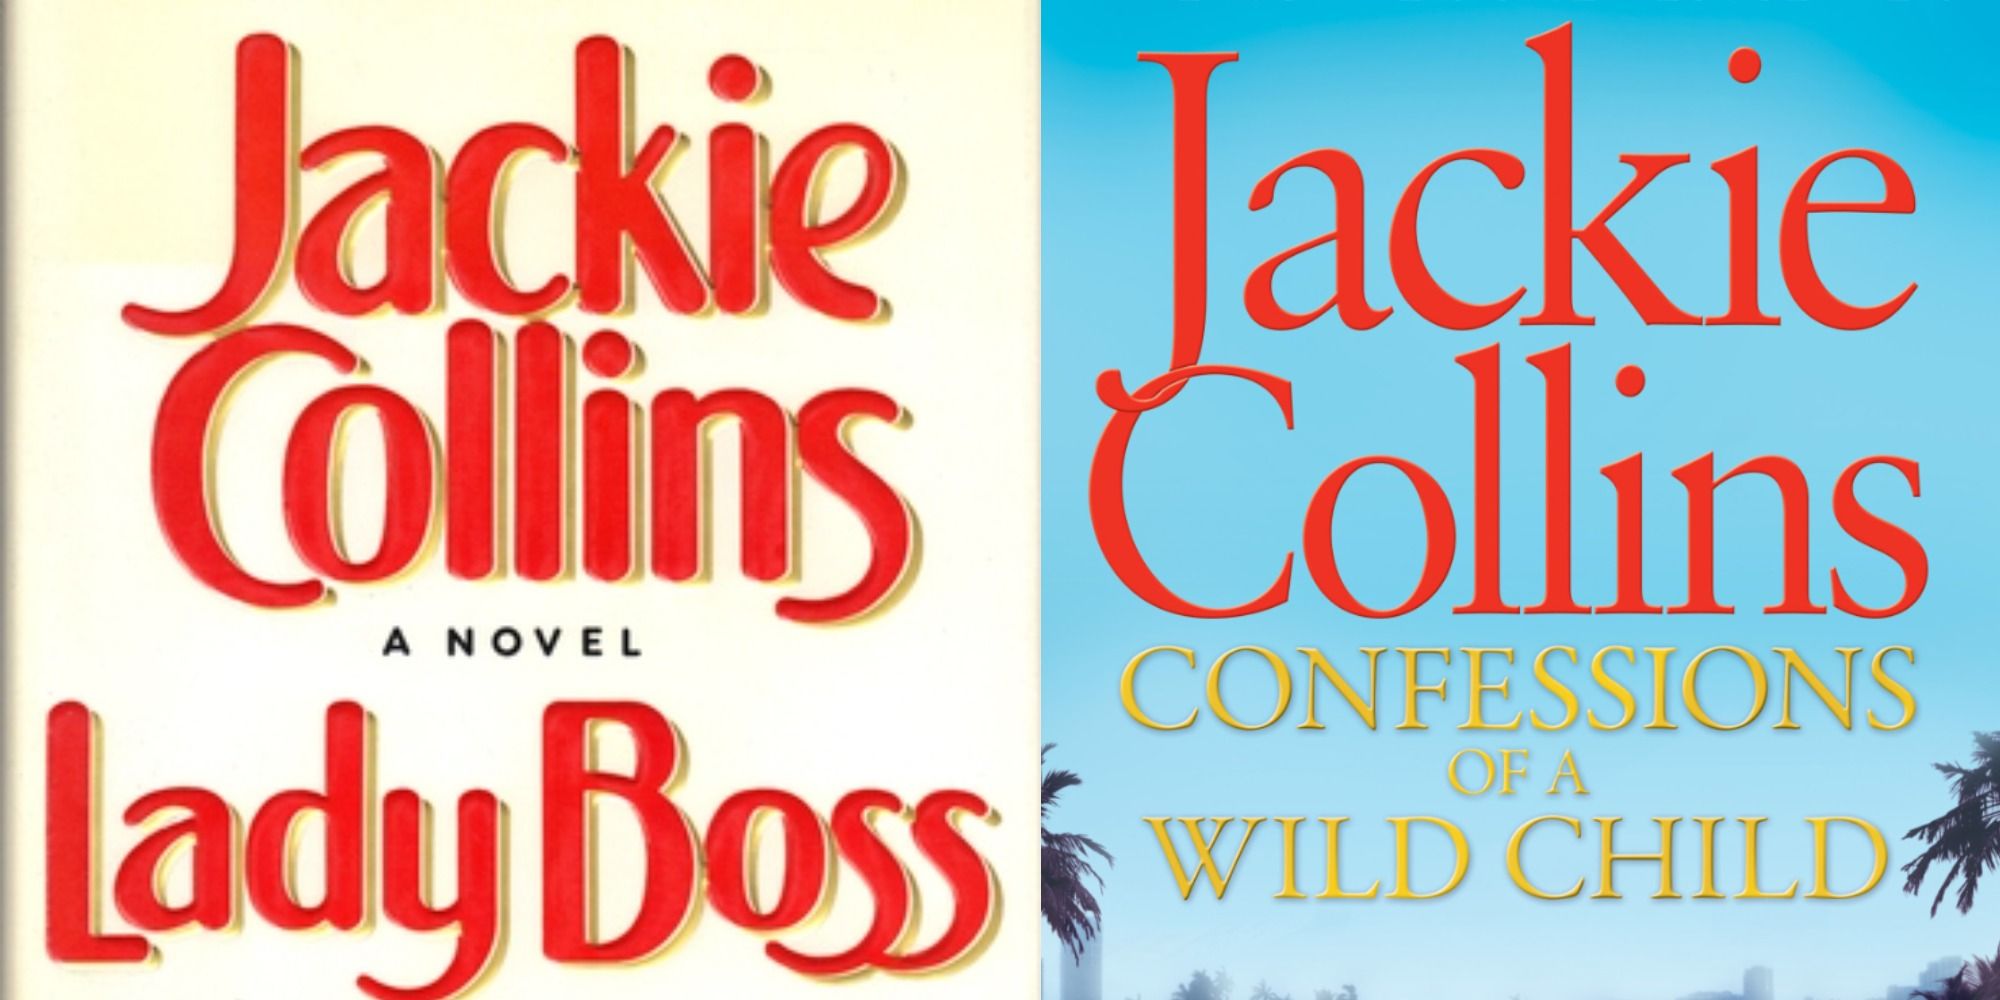 Split image of Lady Boss and Confessions of a Wild Child by Jackie Collins.